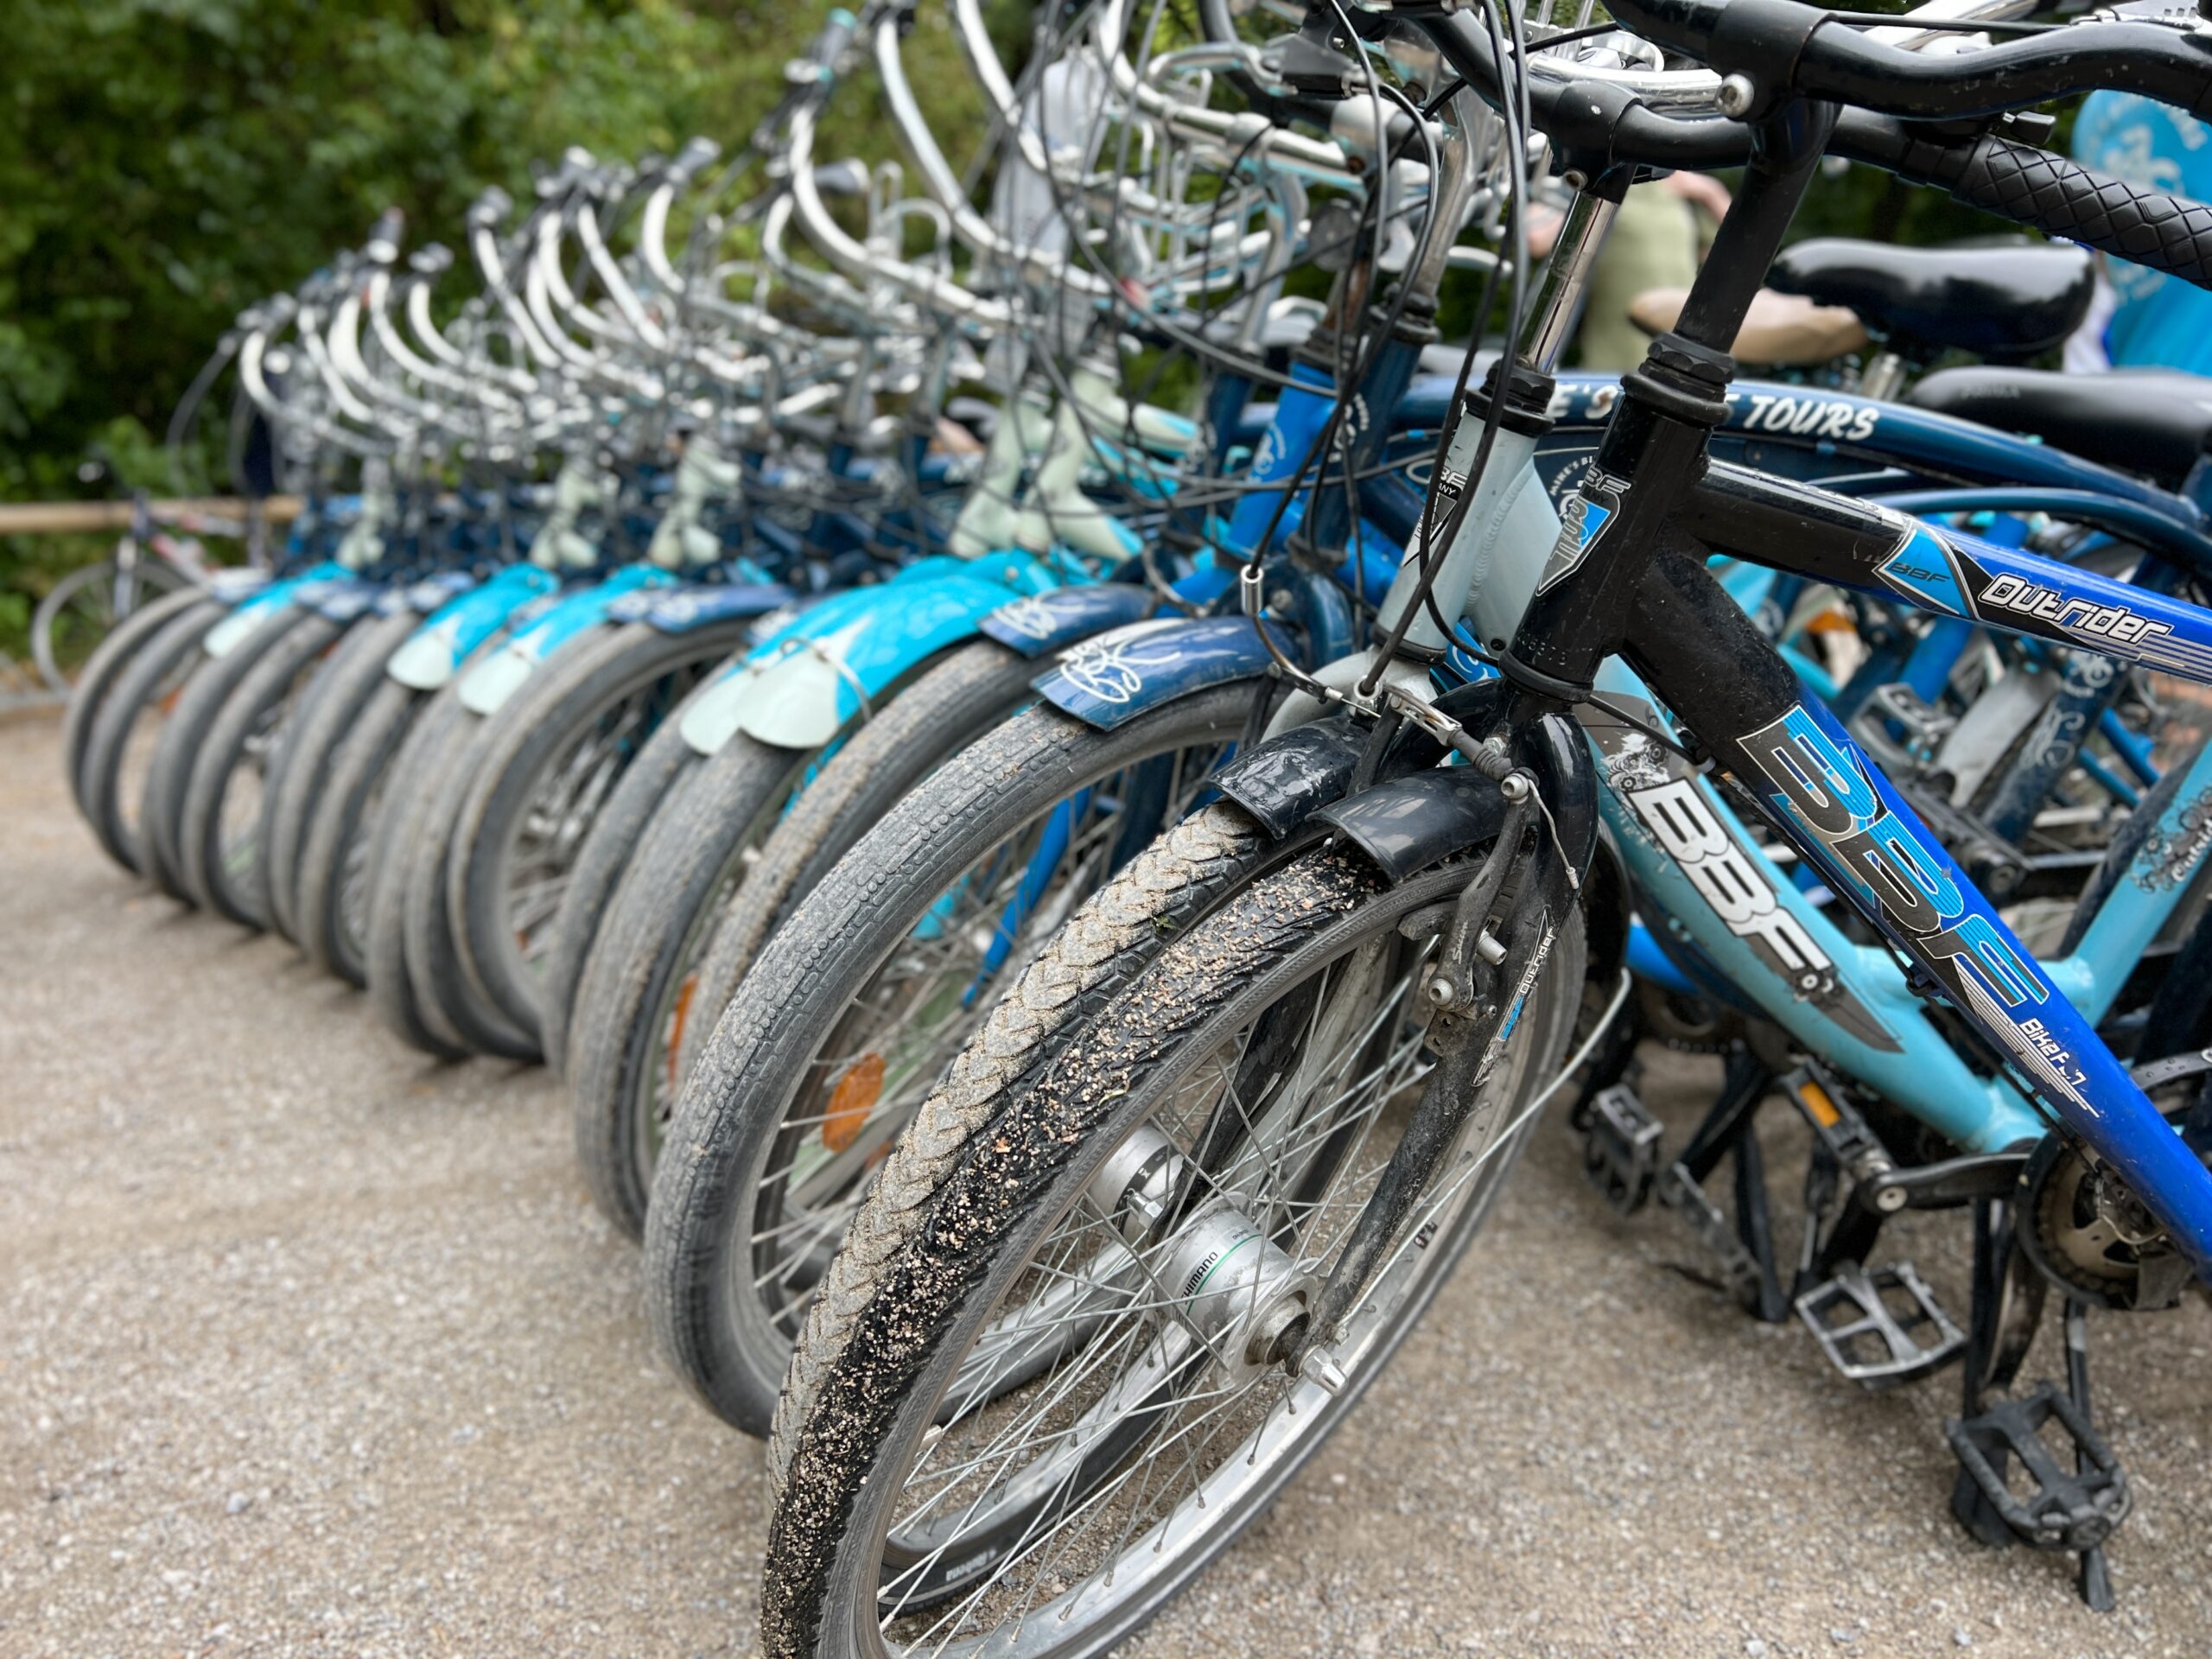 A row of bikes to rent in St. Petersburg